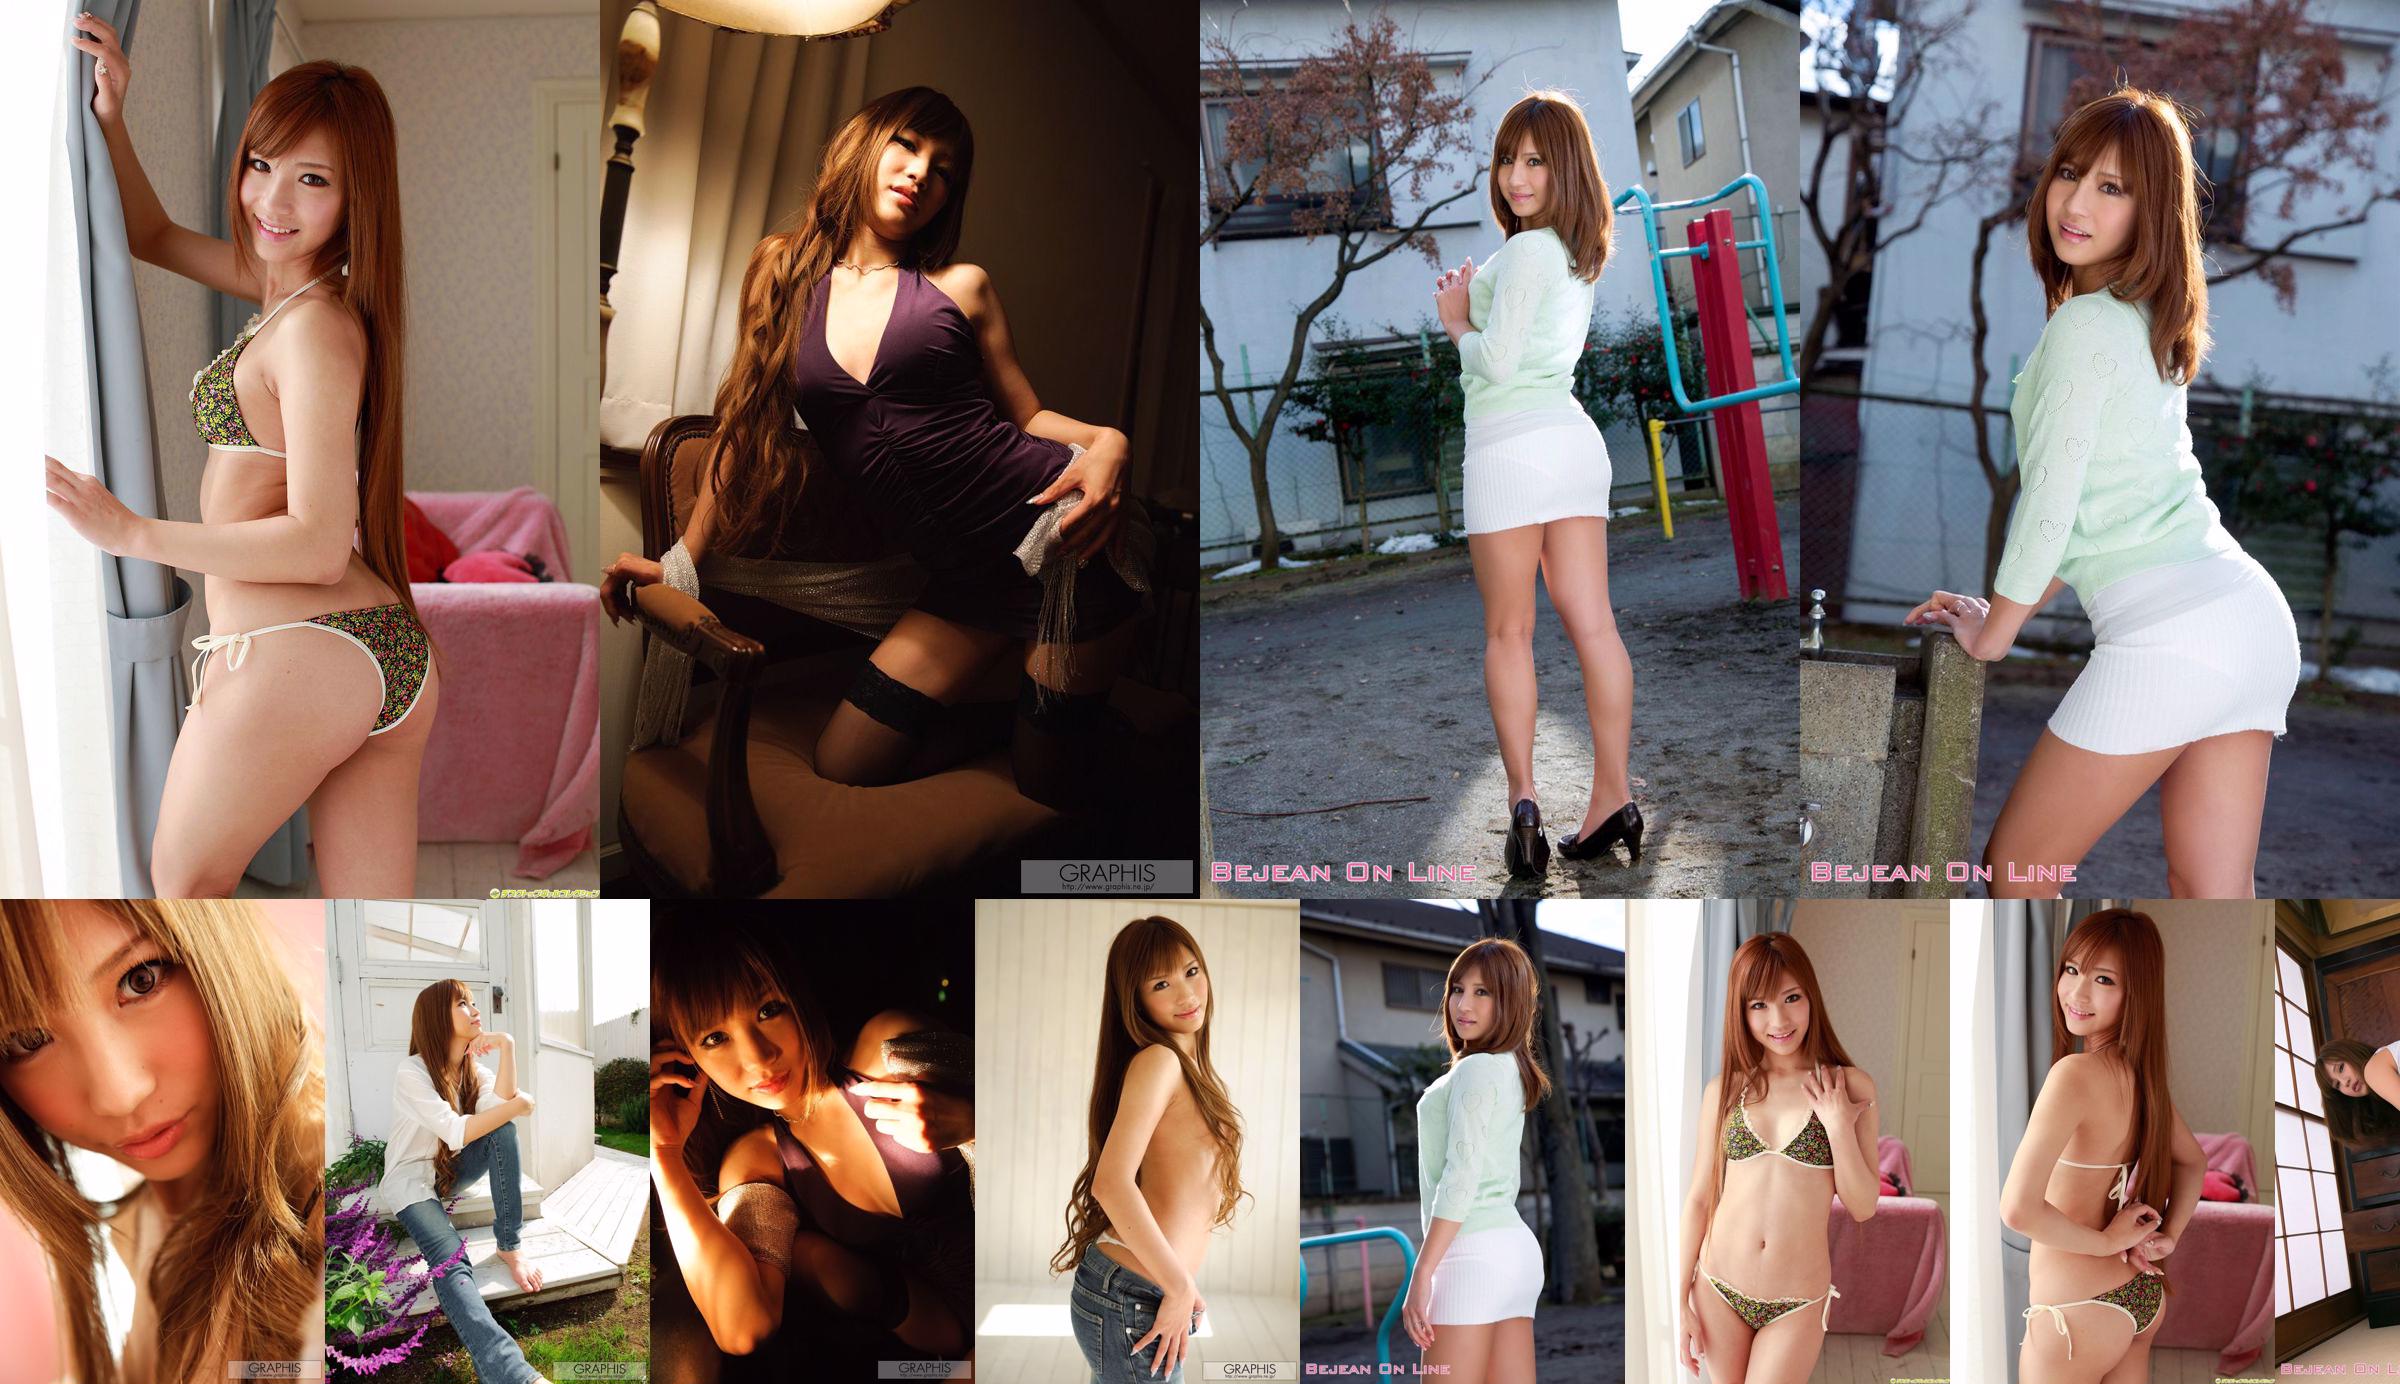 Special Special Gravure Anna Anjou Anna Anjo [Bejean On Line] No.395fc6 Page 1